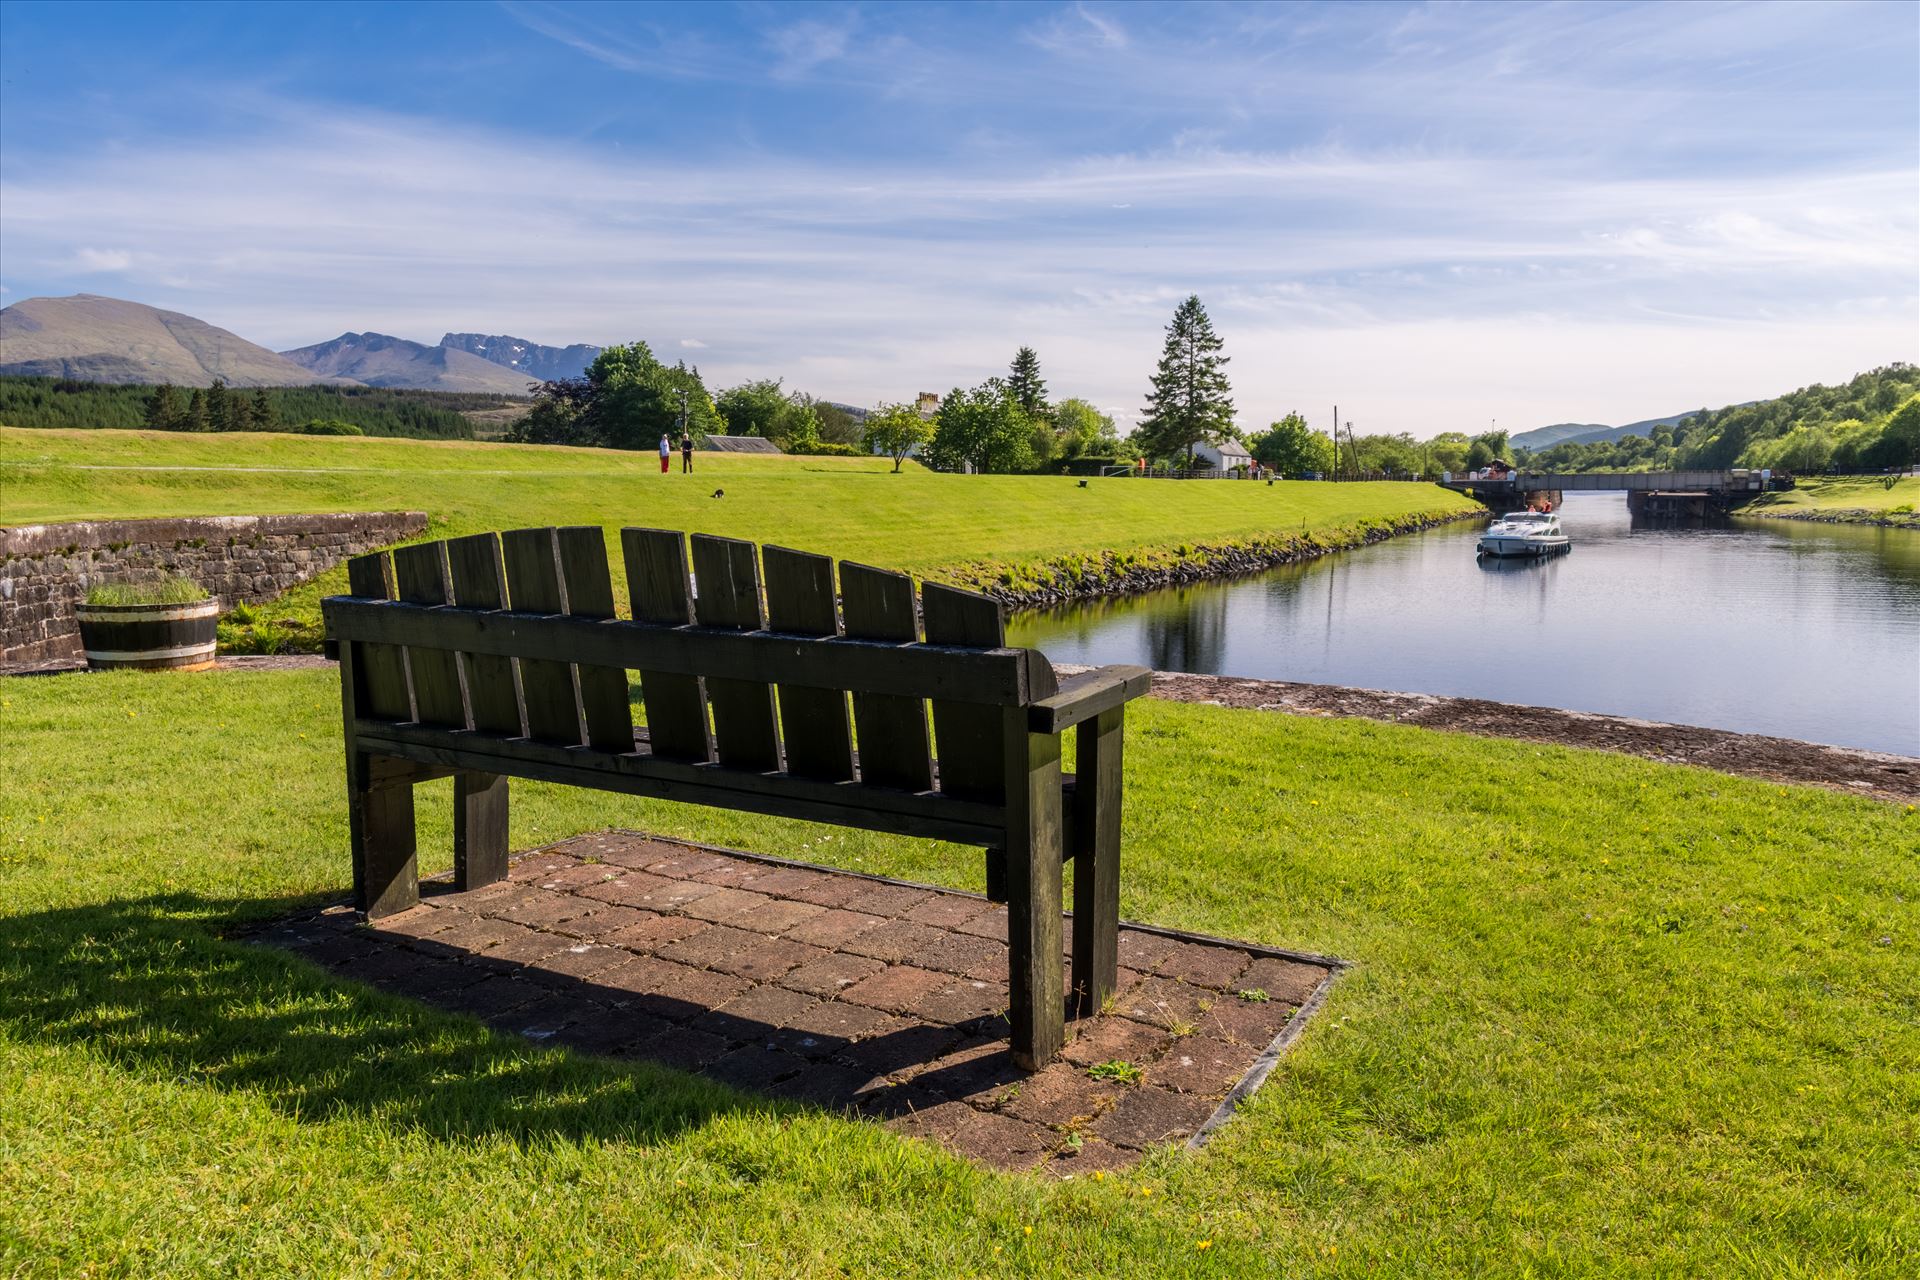 A seat with a view Overlooking the Caladonian canal at Kytra Locks, the seat provides stunning views towards Ben Nevis by philreay